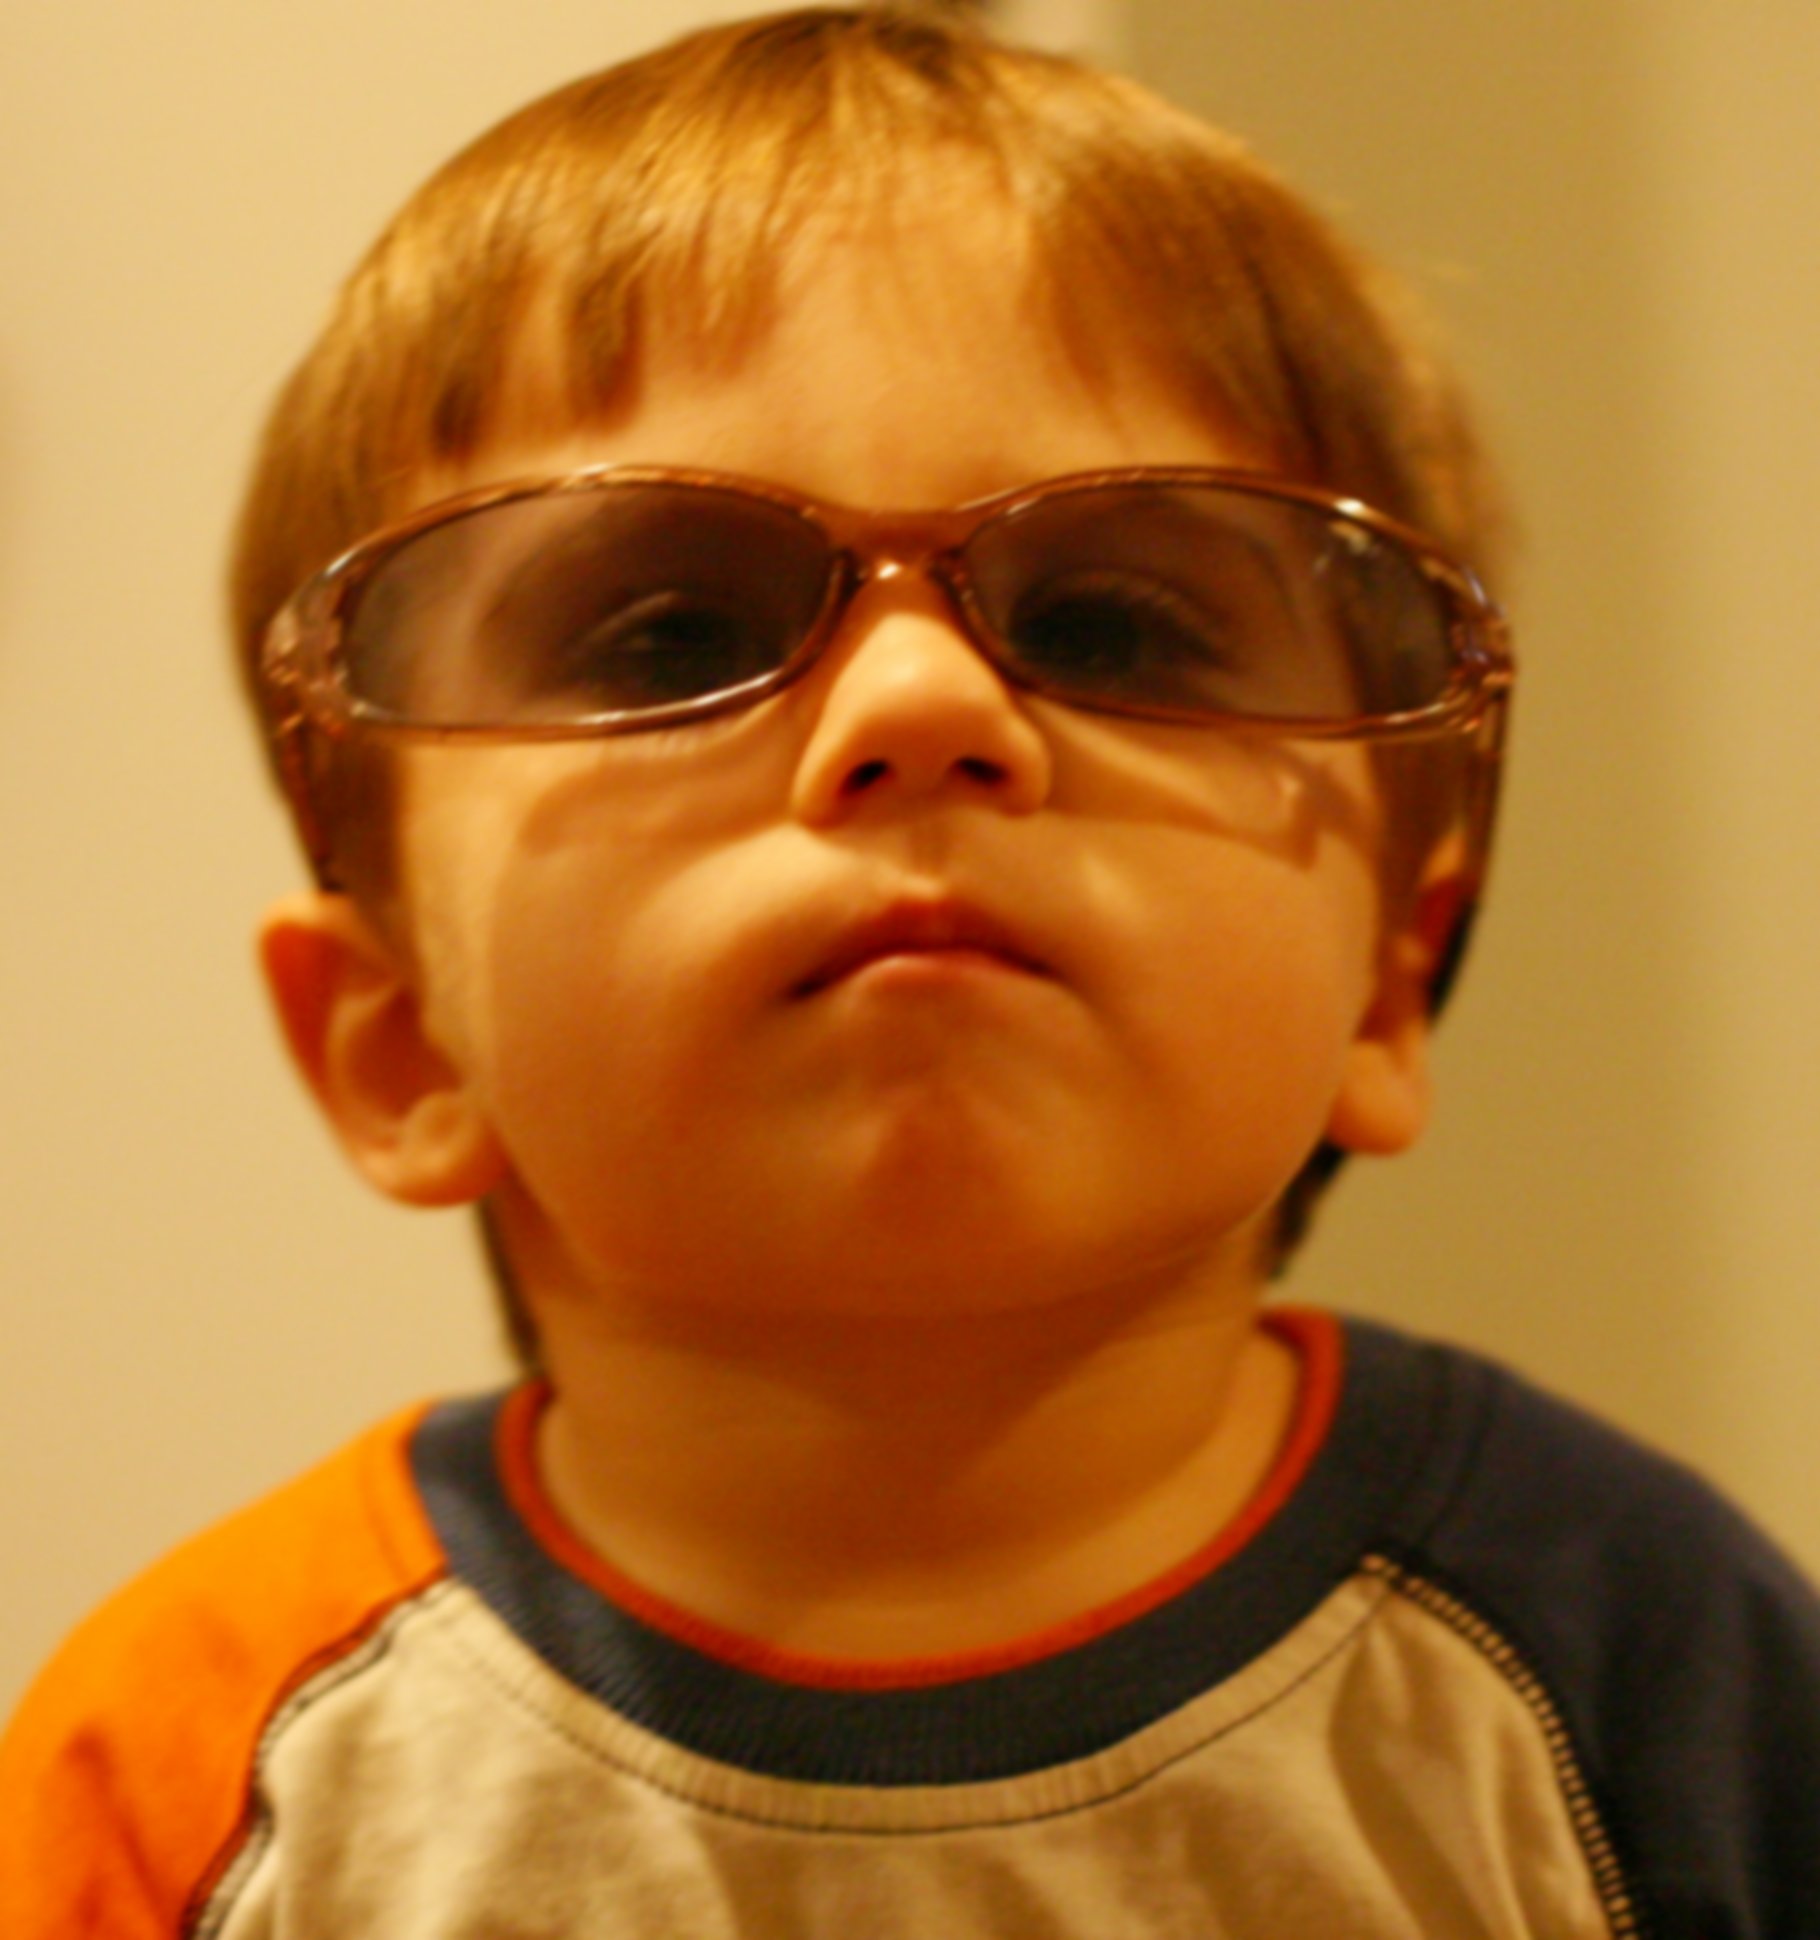 a small child wearing large glasses stands and stares